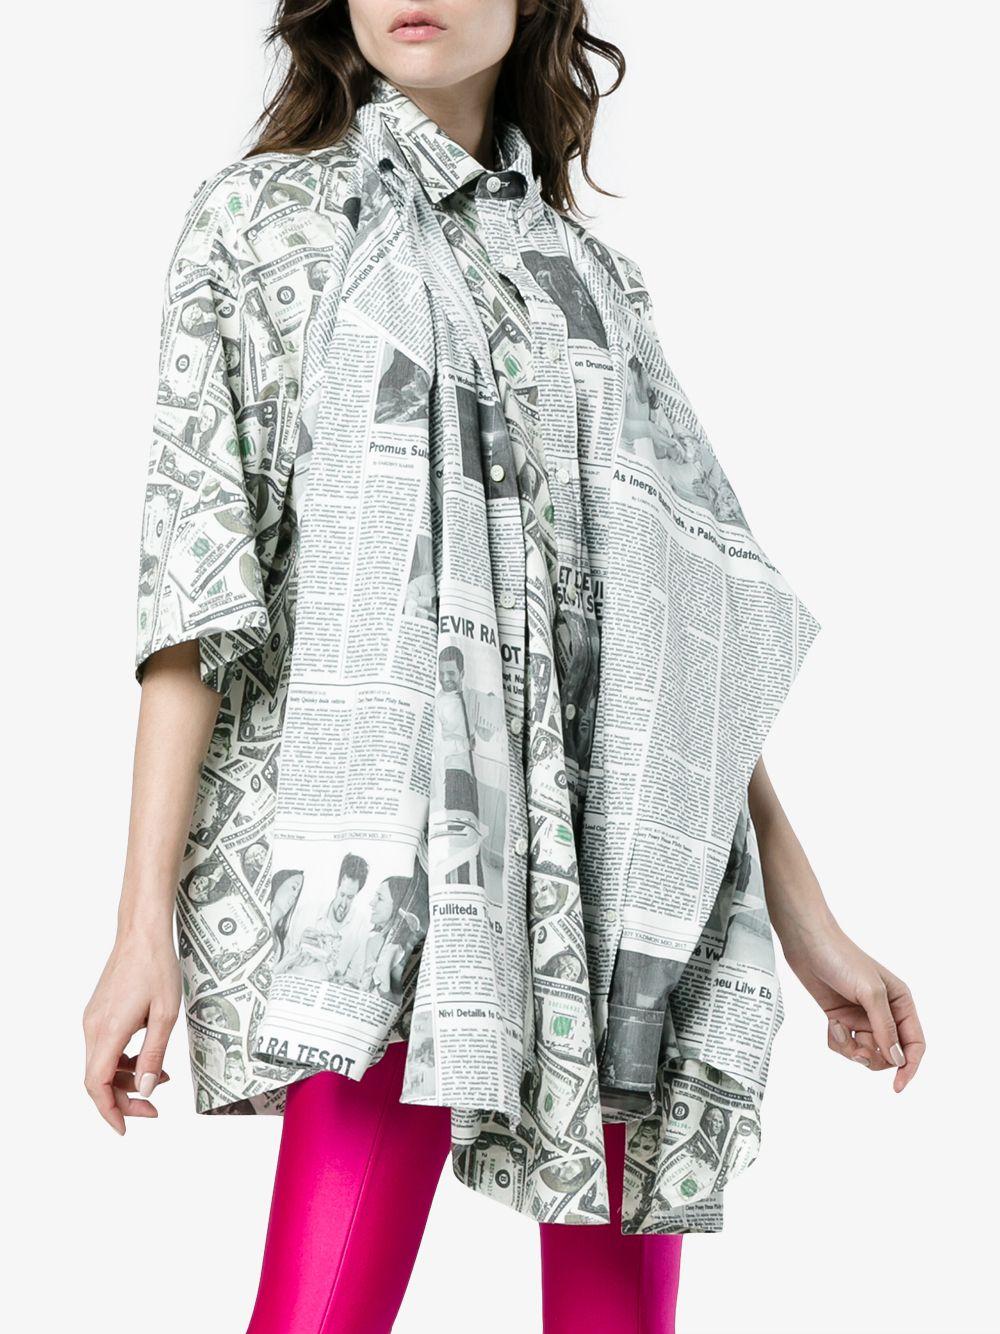 Balenciaga oversized long sleeve poplin shirt featuring  dollar and newspaper  graphic pattern.
Runway model.Its actually a double shirt:Dollar print side can be worn as short sleeve with newspaper print sleeves hanging in the front and newspaper